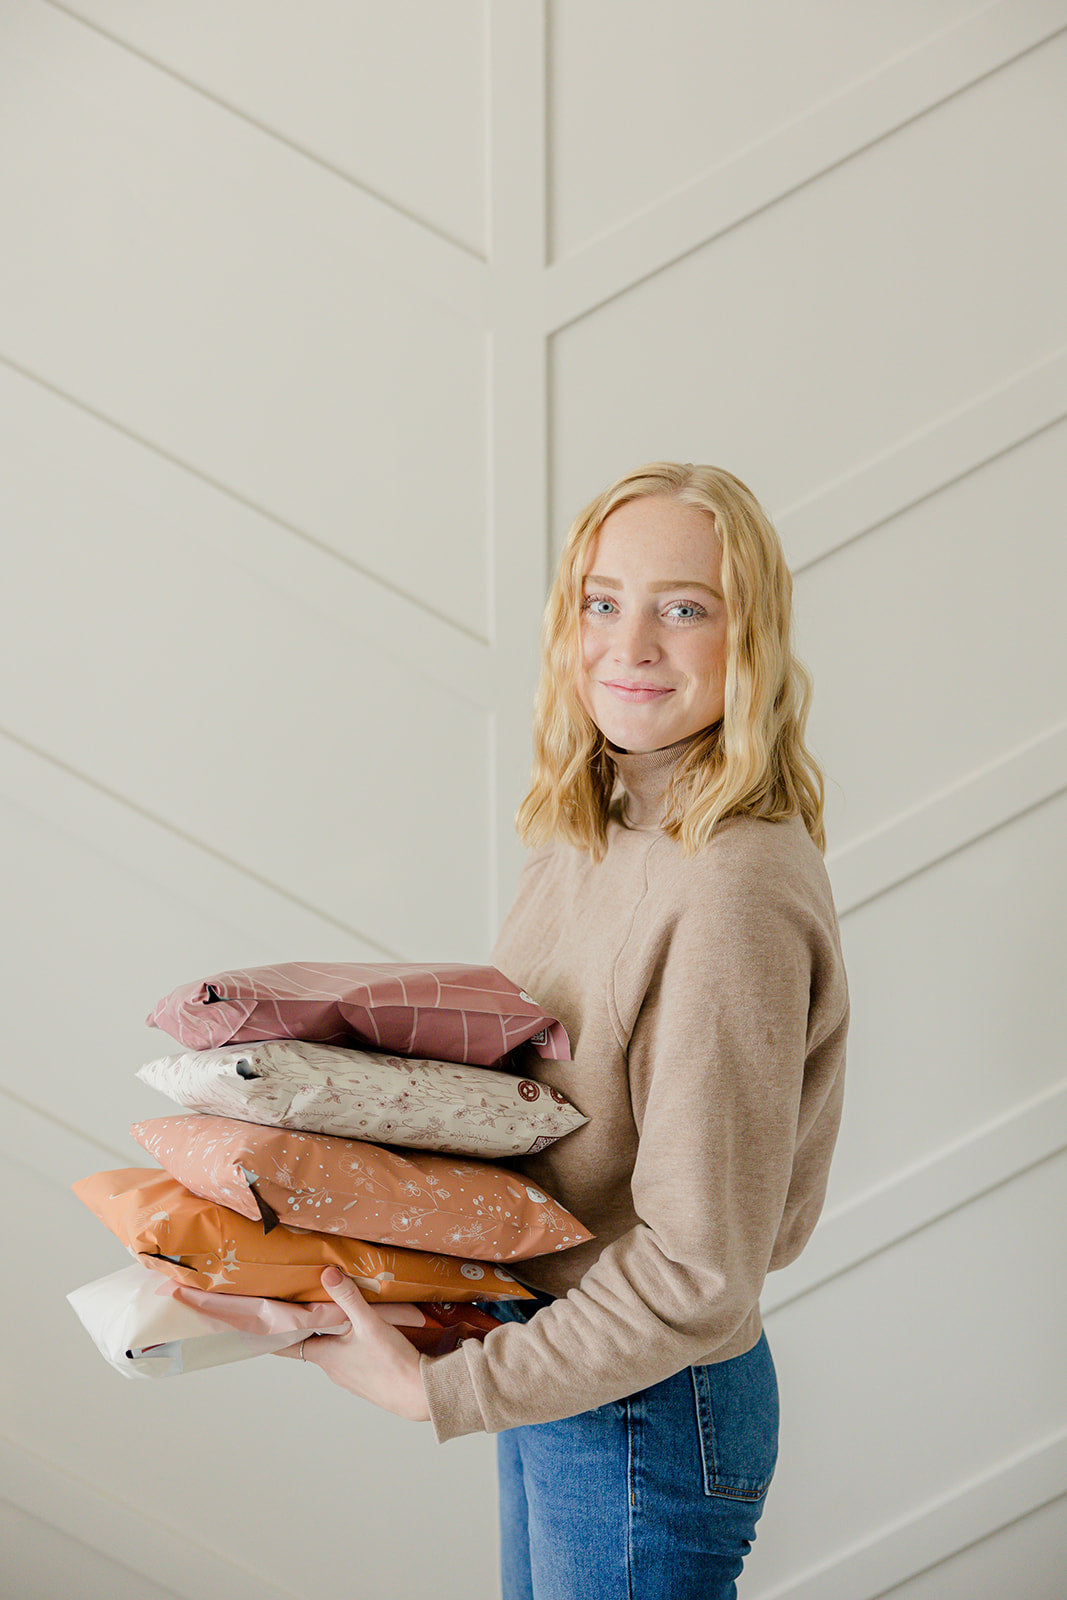 A woman holding a stack of mailer bags 6" x 9" pillows in front of a white wall.